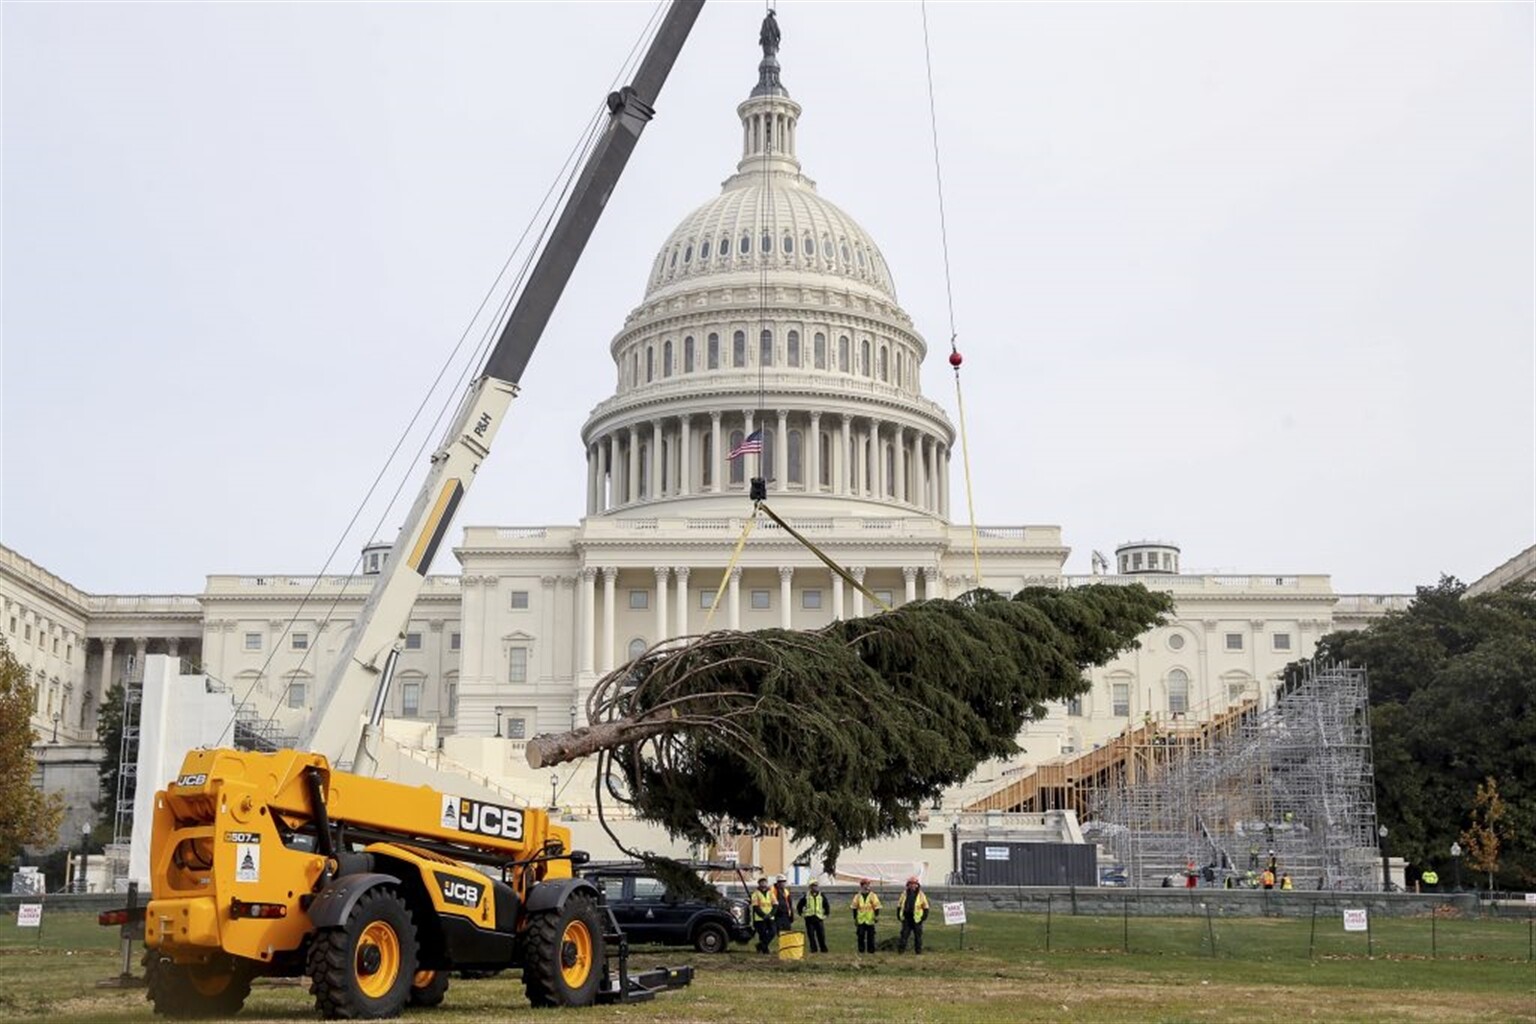 It will be a White Christmas at the White House thanks to JCB Loadall